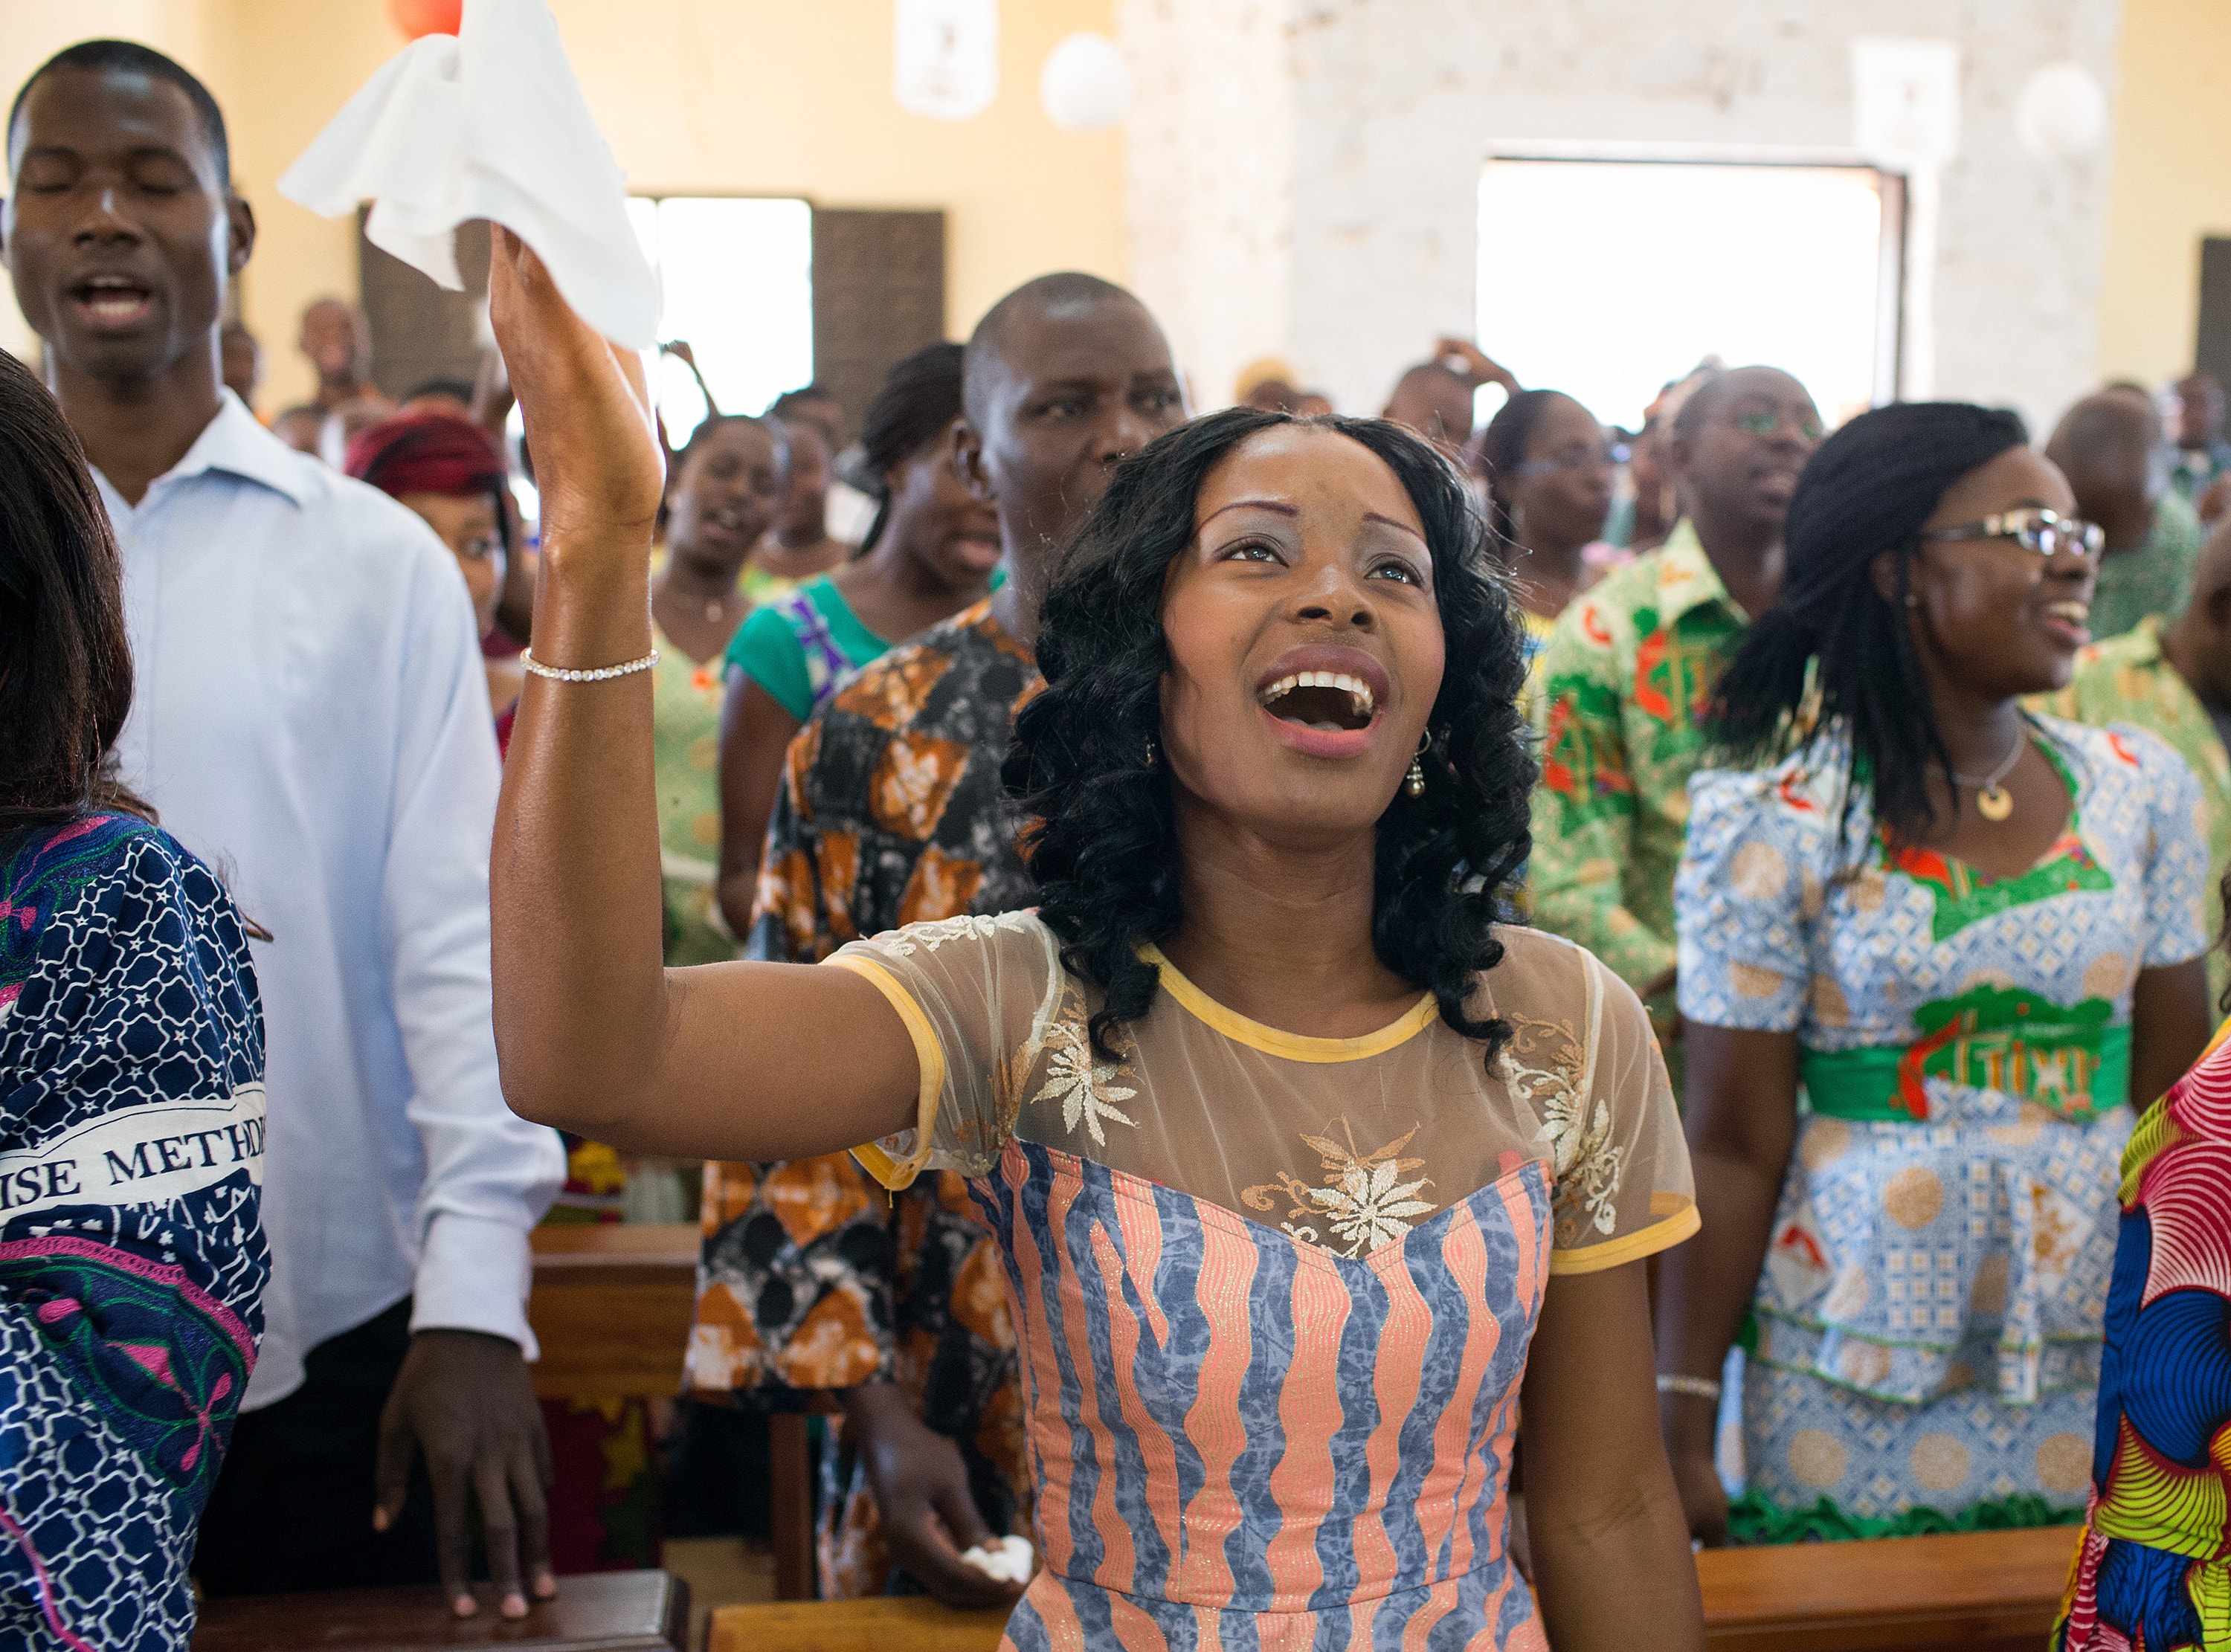 Claudia Teli N'guessan sings during worship at Temple Emmanuel United Methodist Church in Man, Côte d'Ivoire, in this 2015 file photo. Photo by Mike DuBose, UM News.